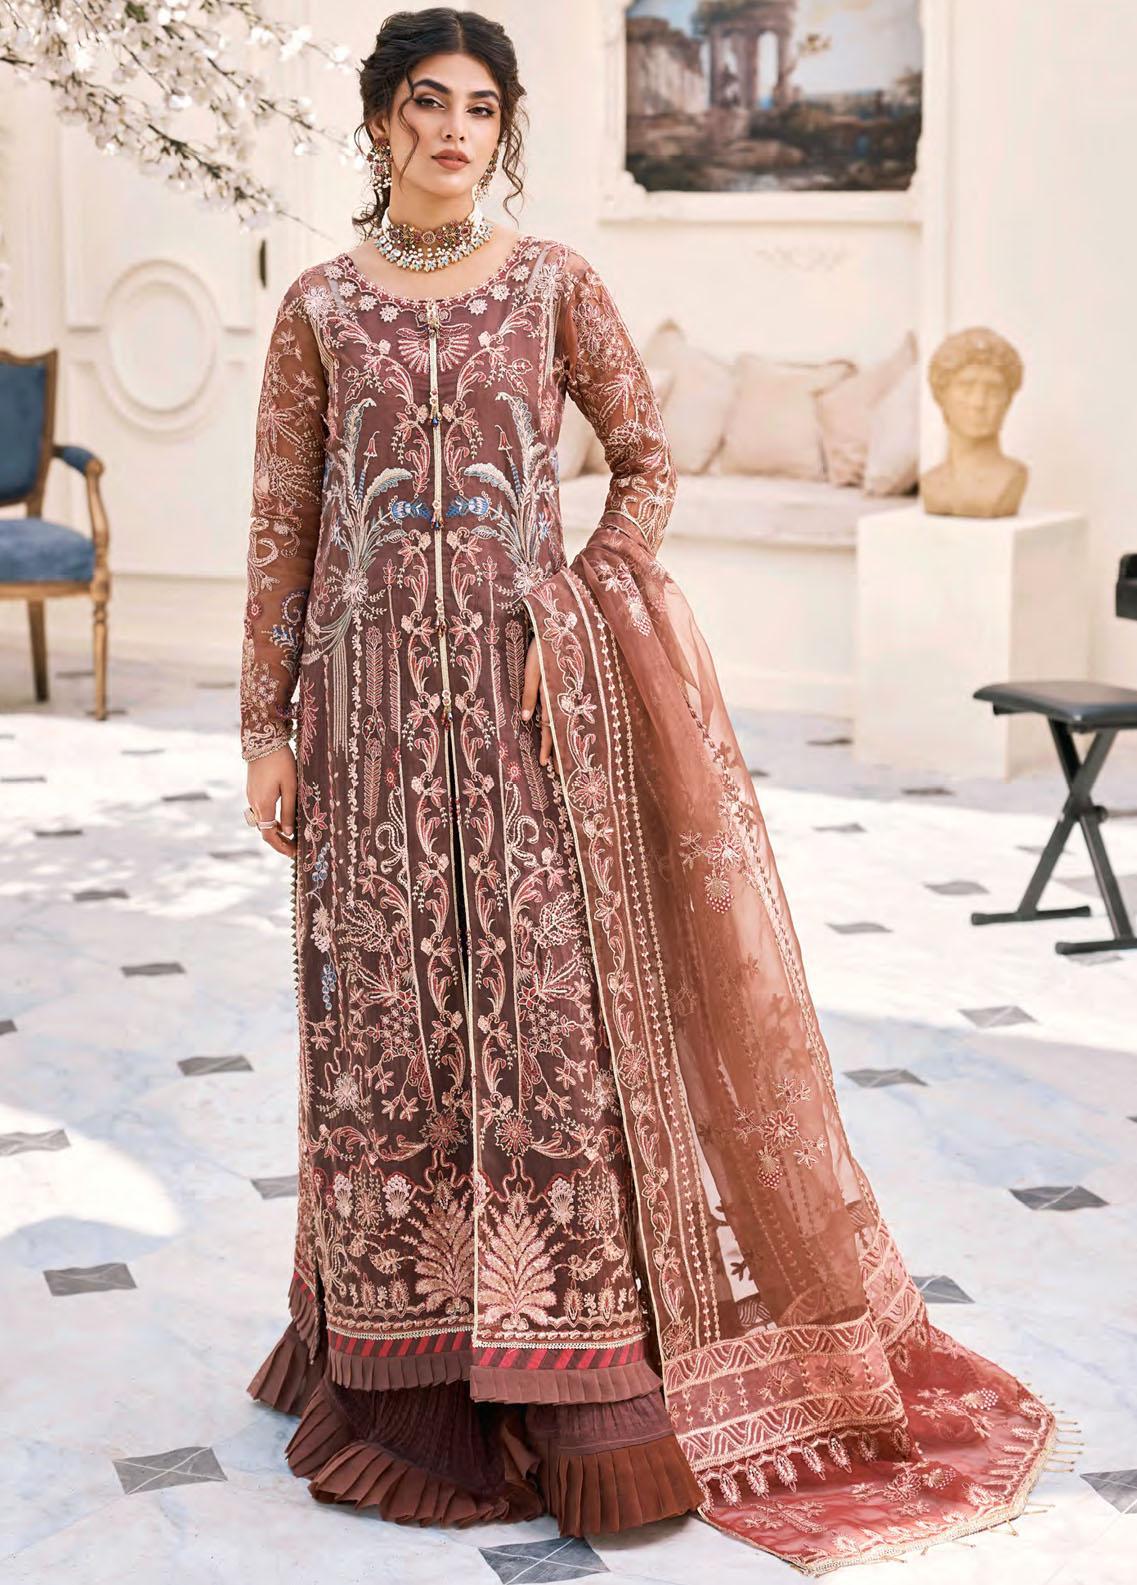 Eshaal By Emaan Adeel Embroidered Suits Unstitched 3 Piece ESH-01